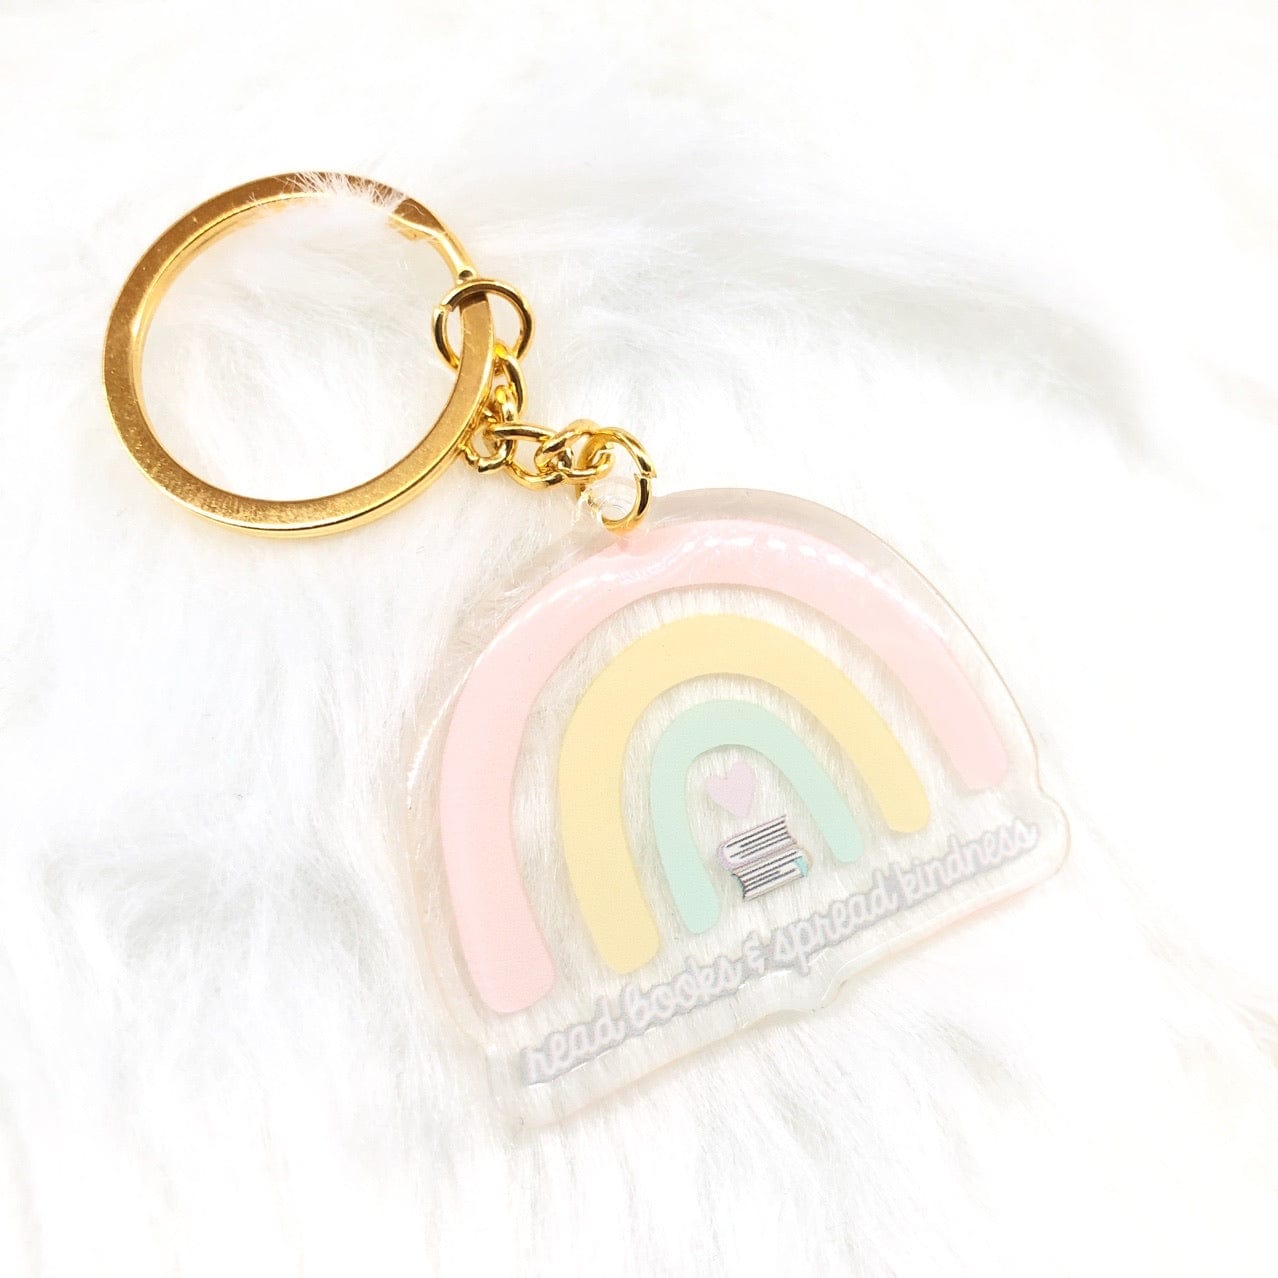 Read Book and Spread Kindness Keychain